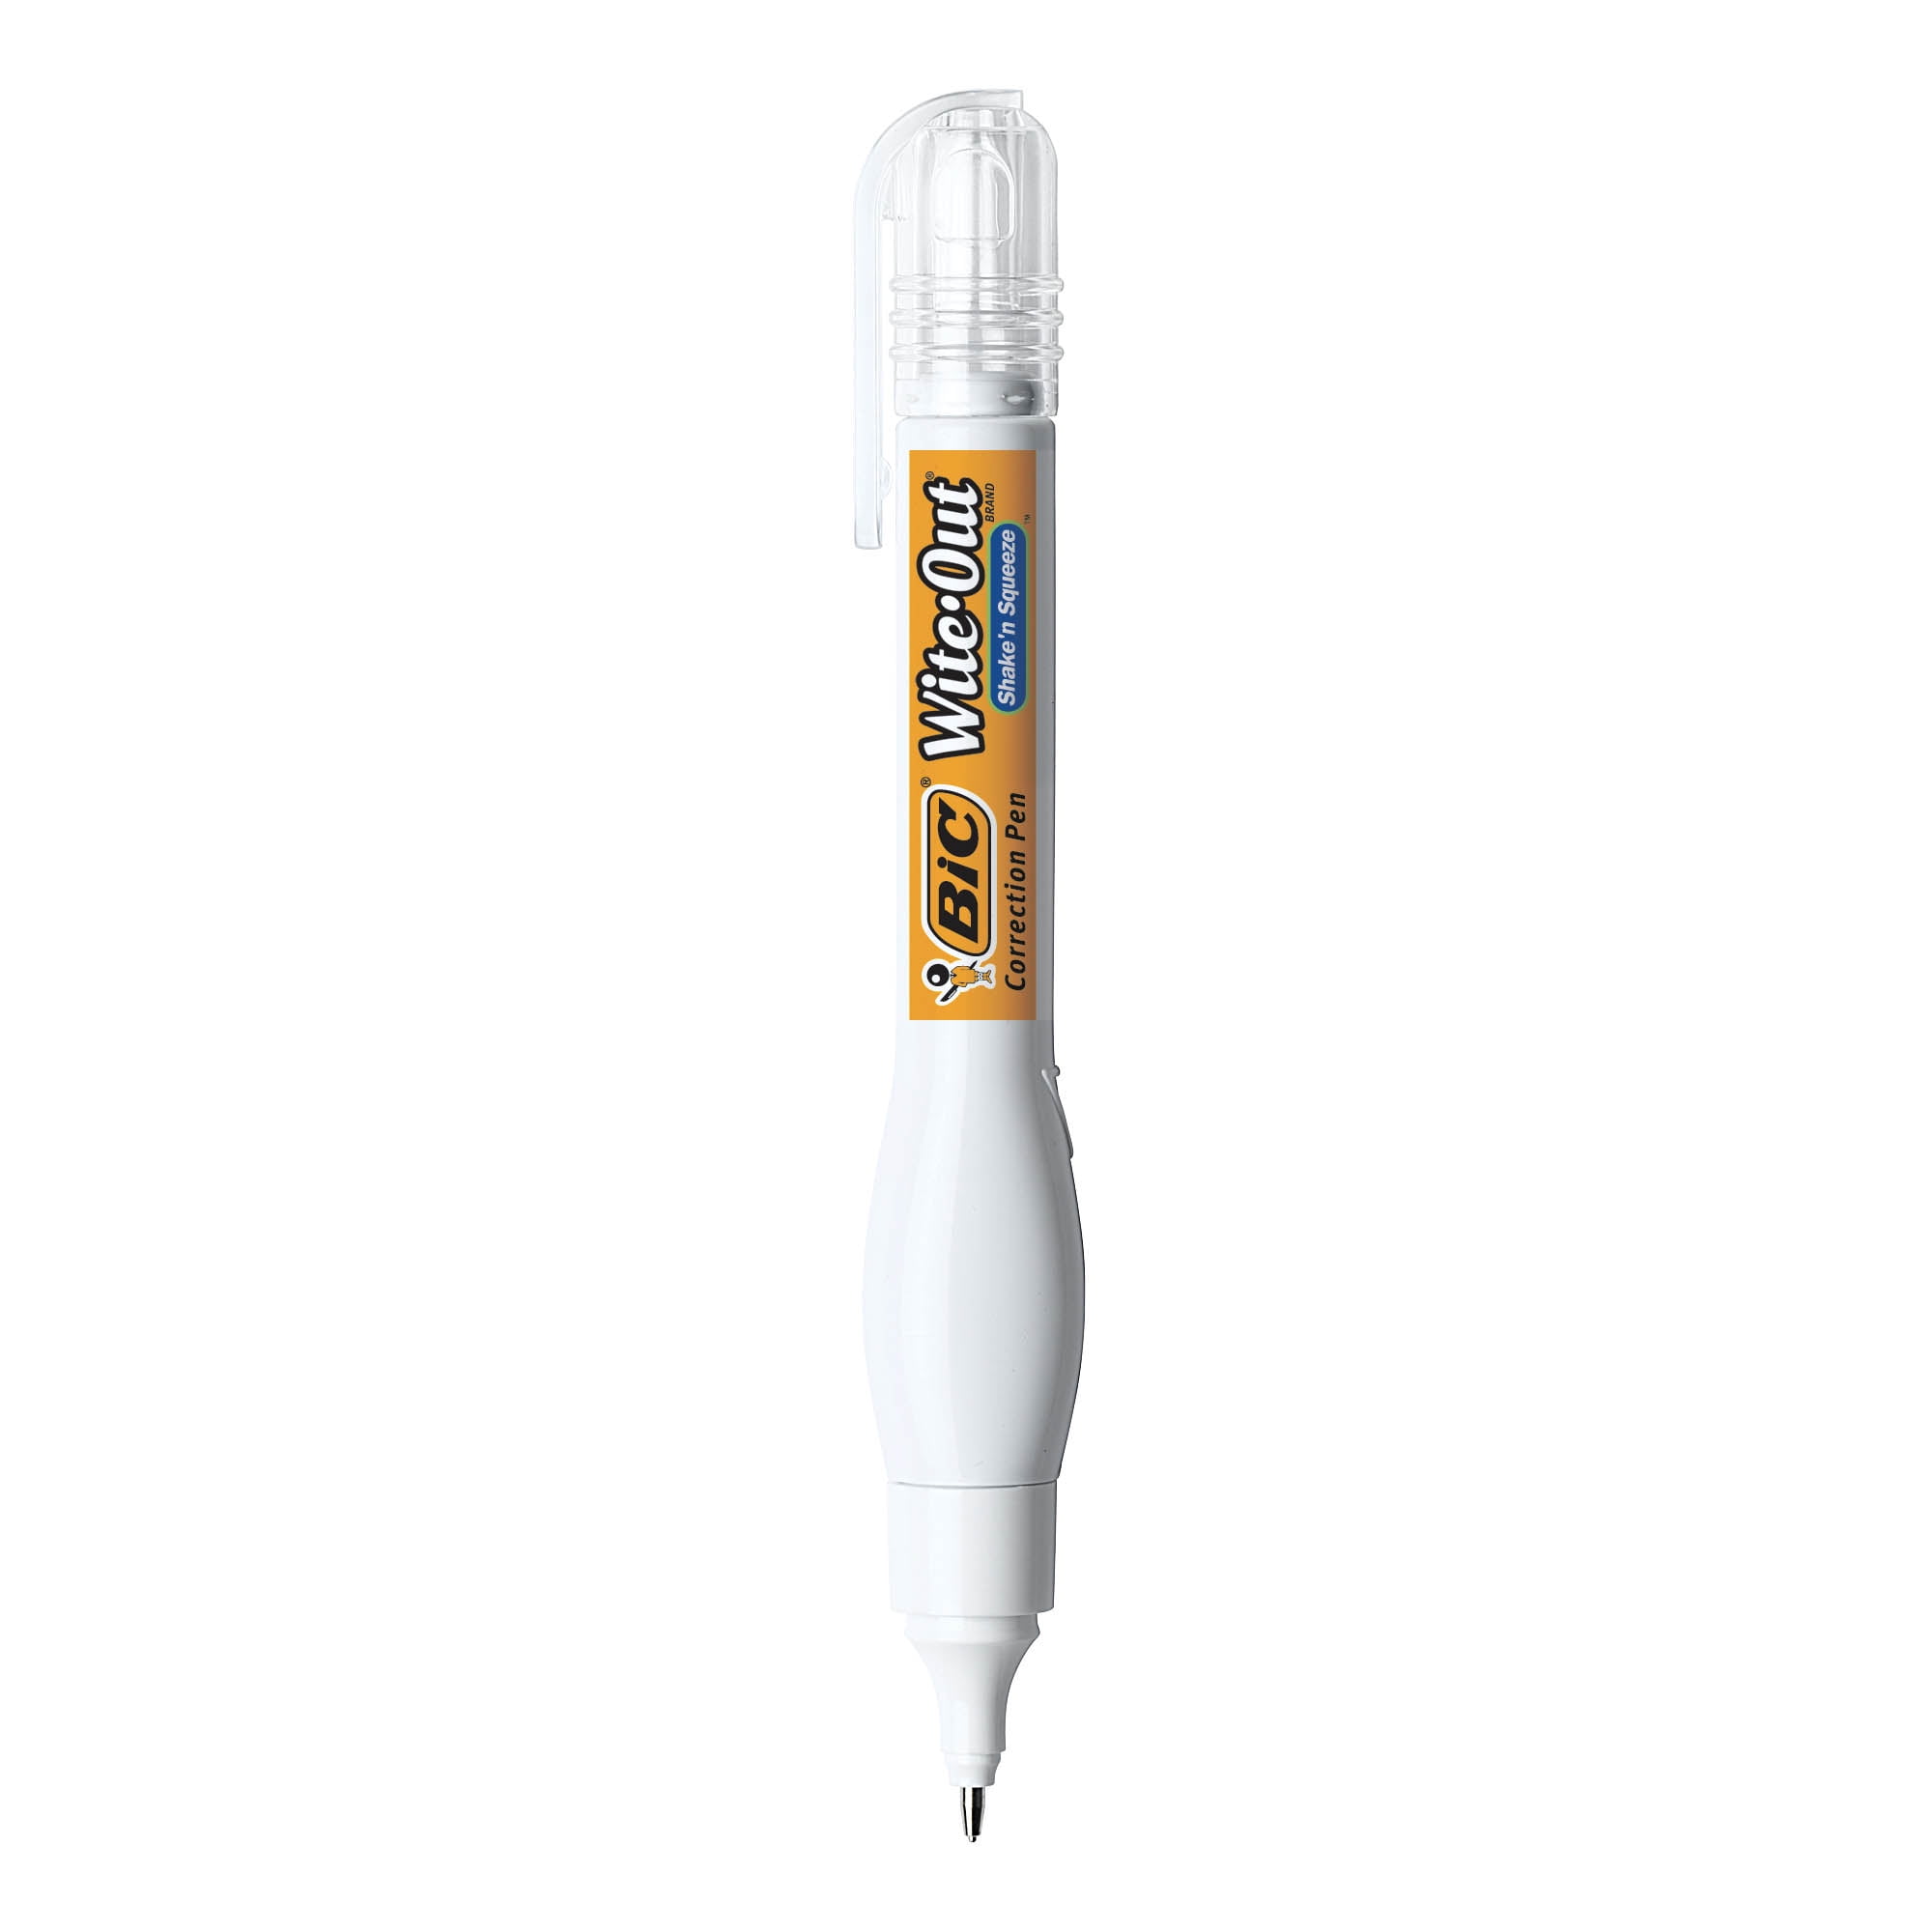 Wite-Out Brand Clic Liner Correction Pen by BIC BICWORTP11-WE